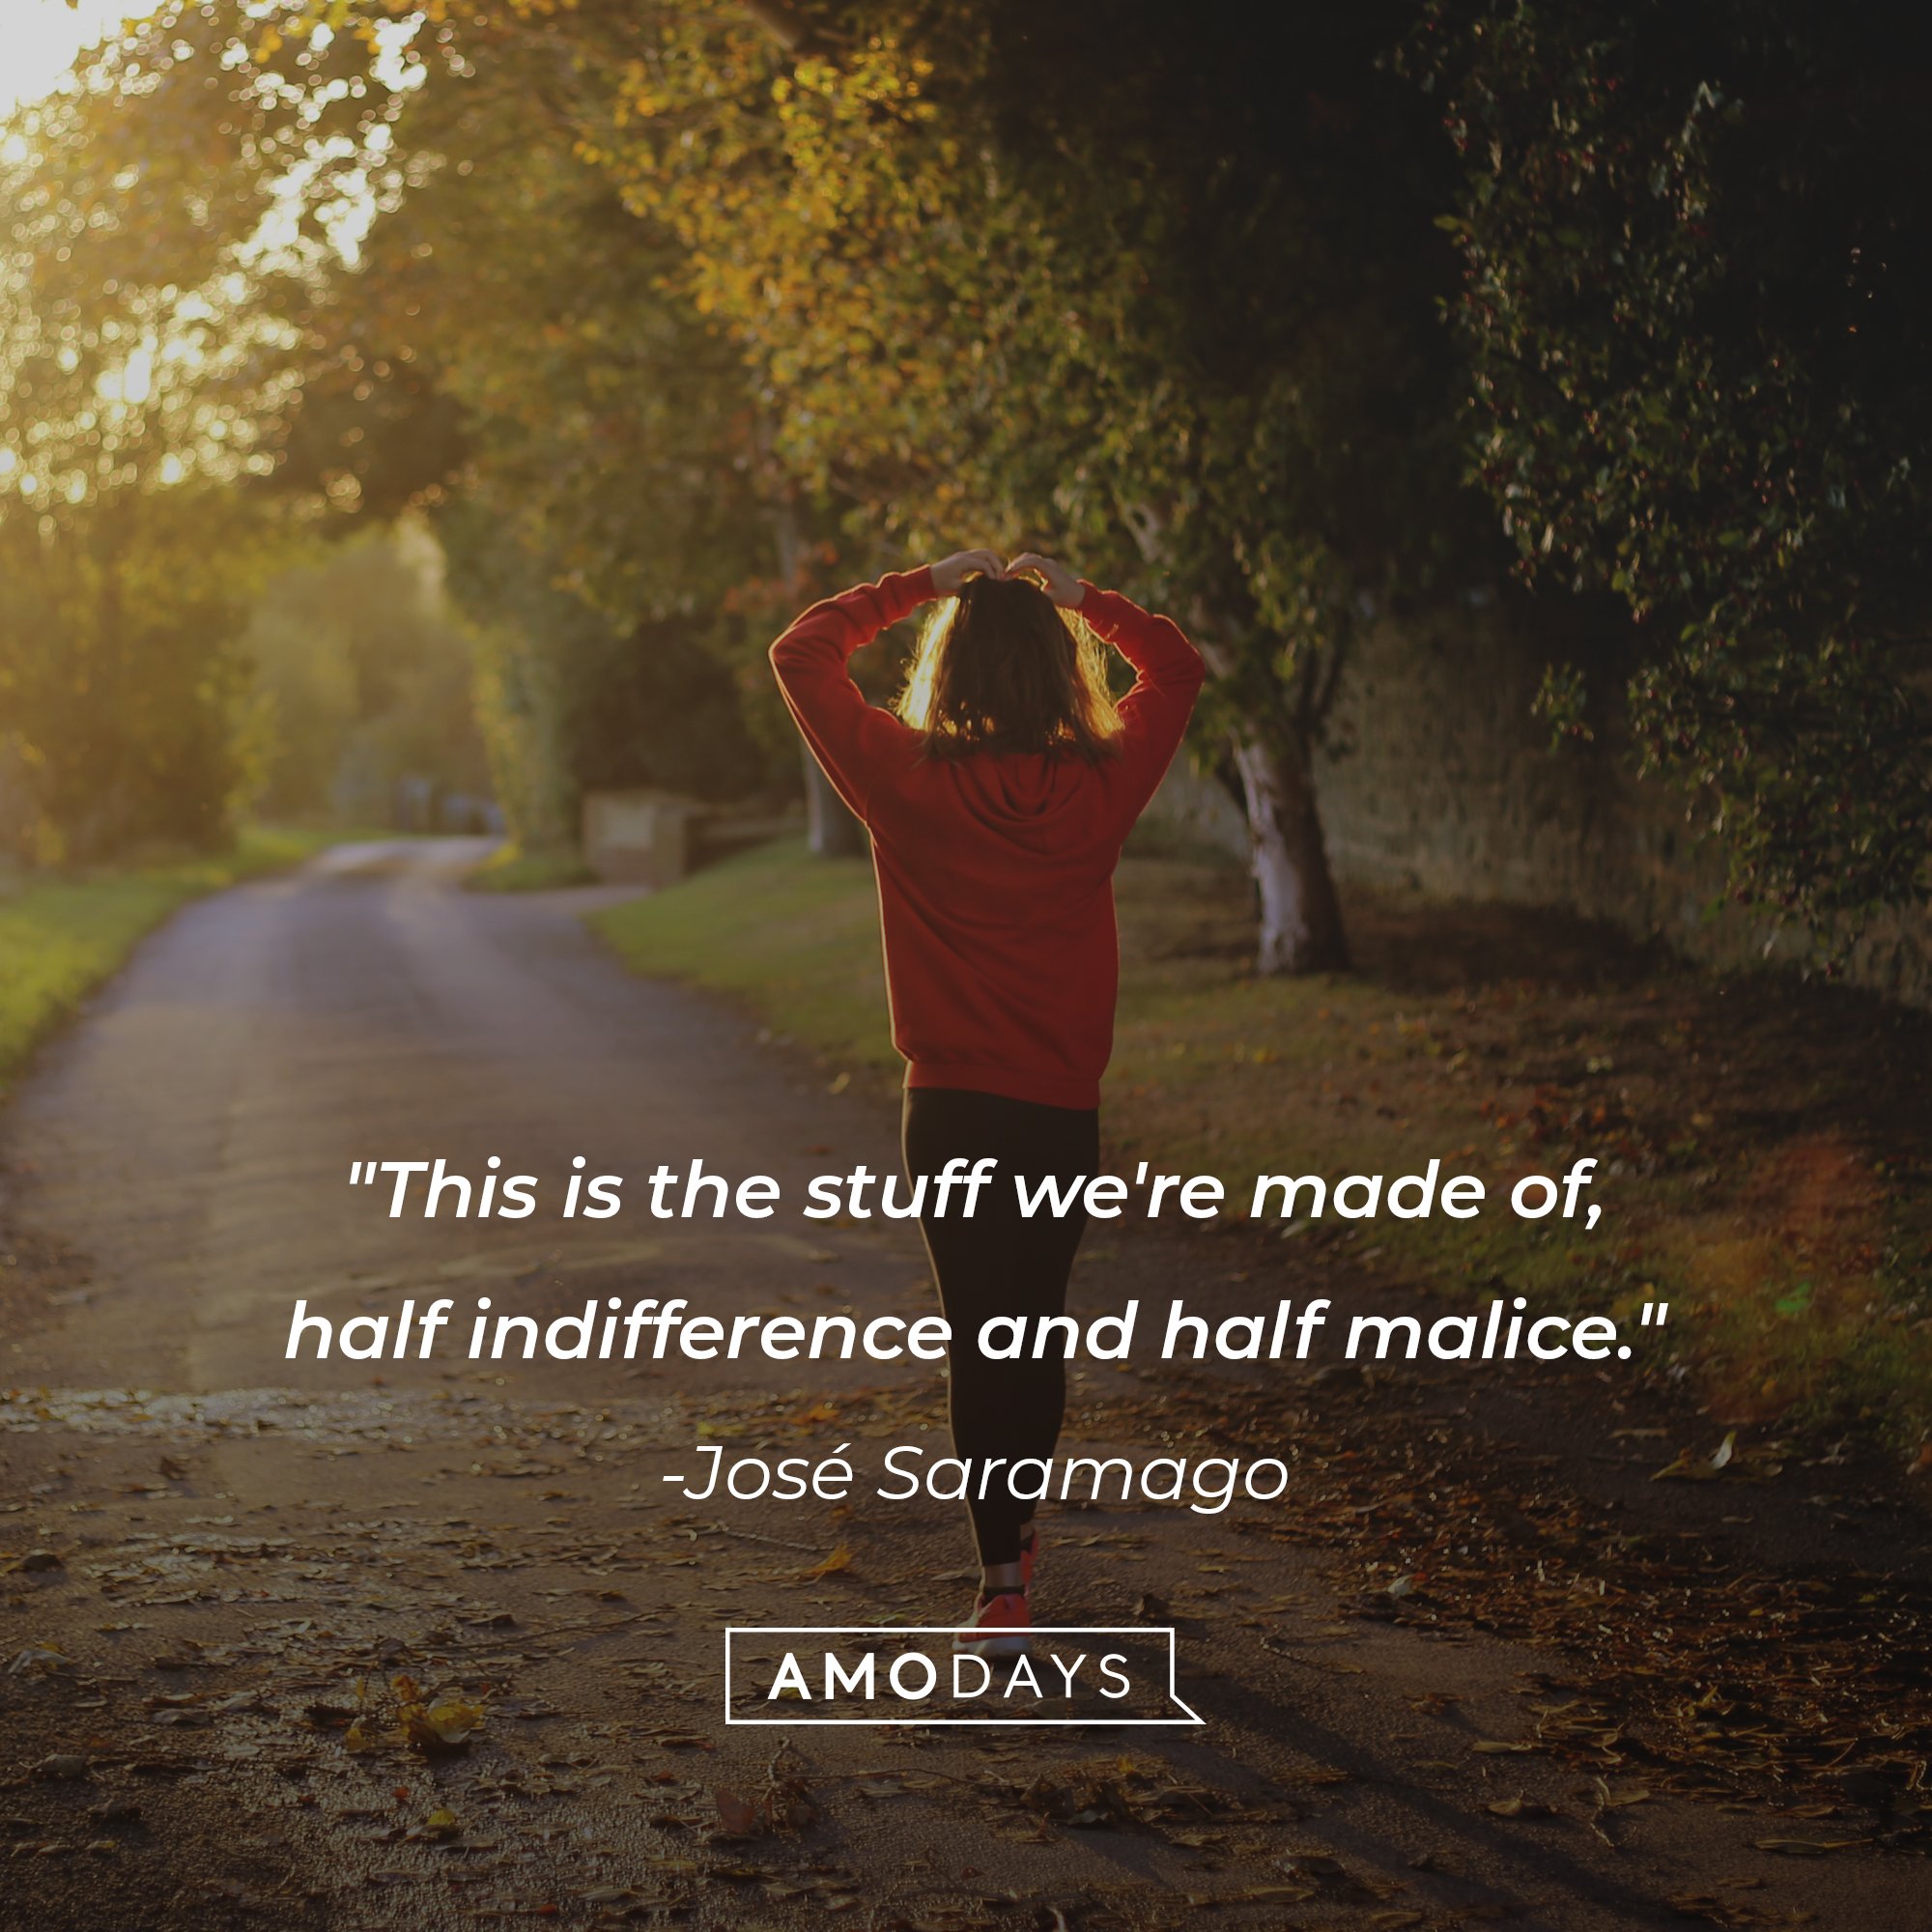 José Saramago's quote: "This is the stuff we're made of, half indifference and half malice." | Image: AmoDays